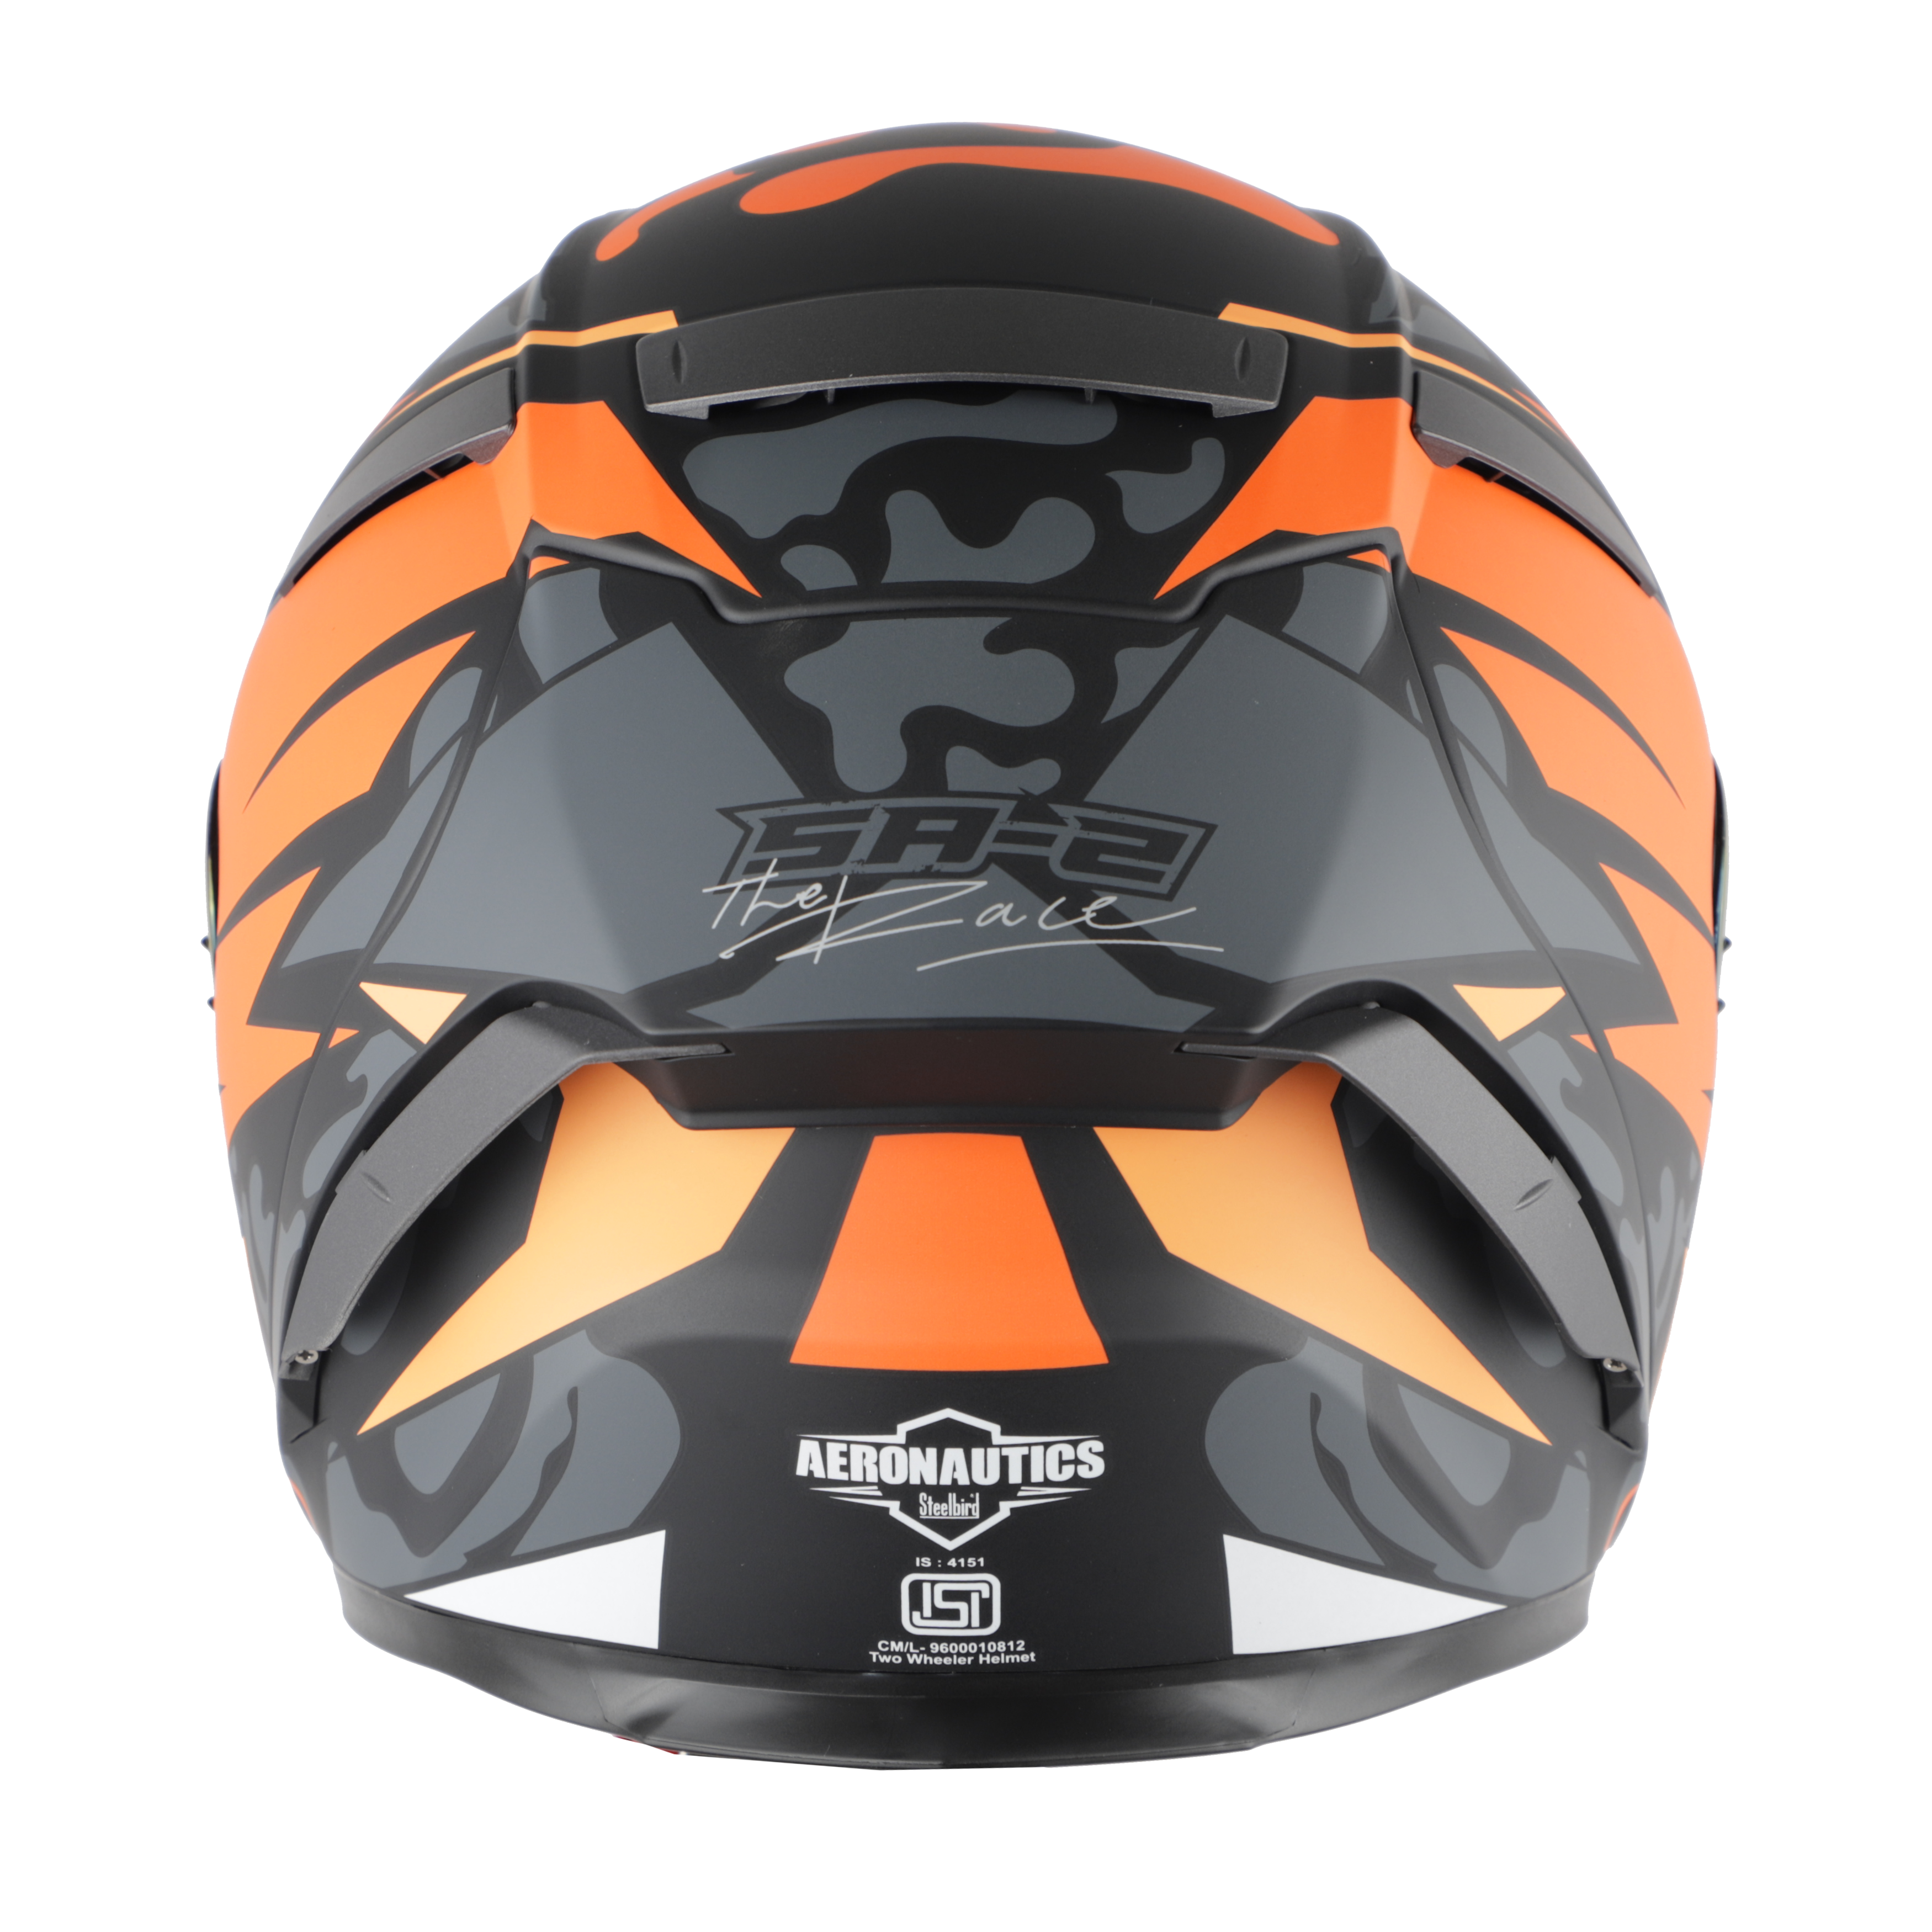 SA-2 TERMINATOR 3.0 GLOSSY BLACK WITH ORANGE FITTED WITH CLEAR VISOR EXTRA SMOKE VISOR FREE (WITH ANTI-FOR SHIELD HOLDER)